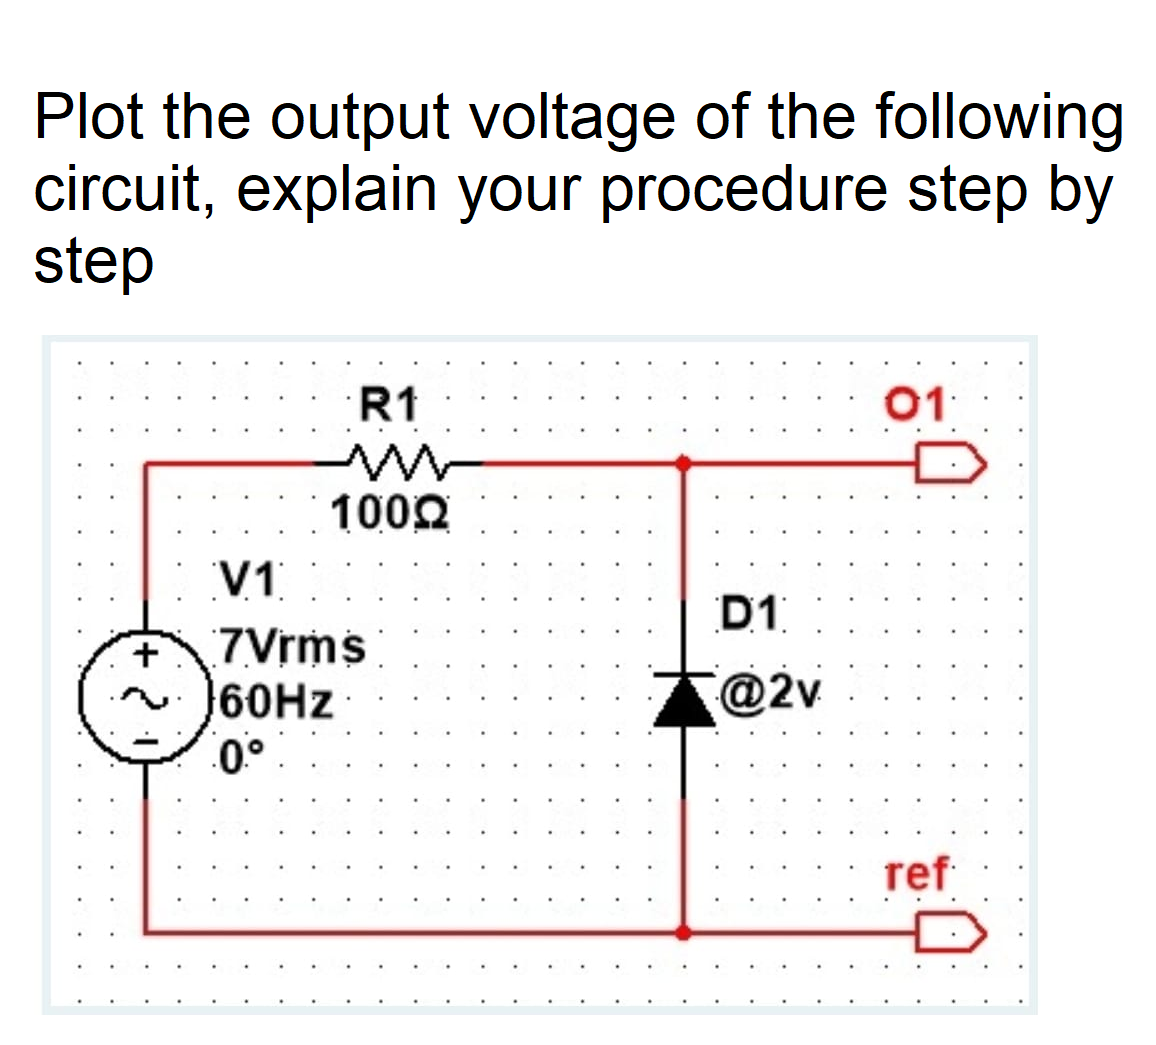 Plot the output voltage of the following
circuit, explain your procedure step by
step
R1
01
1002
V1
D1
7Vrms
|60HZ
A@2v
ref
